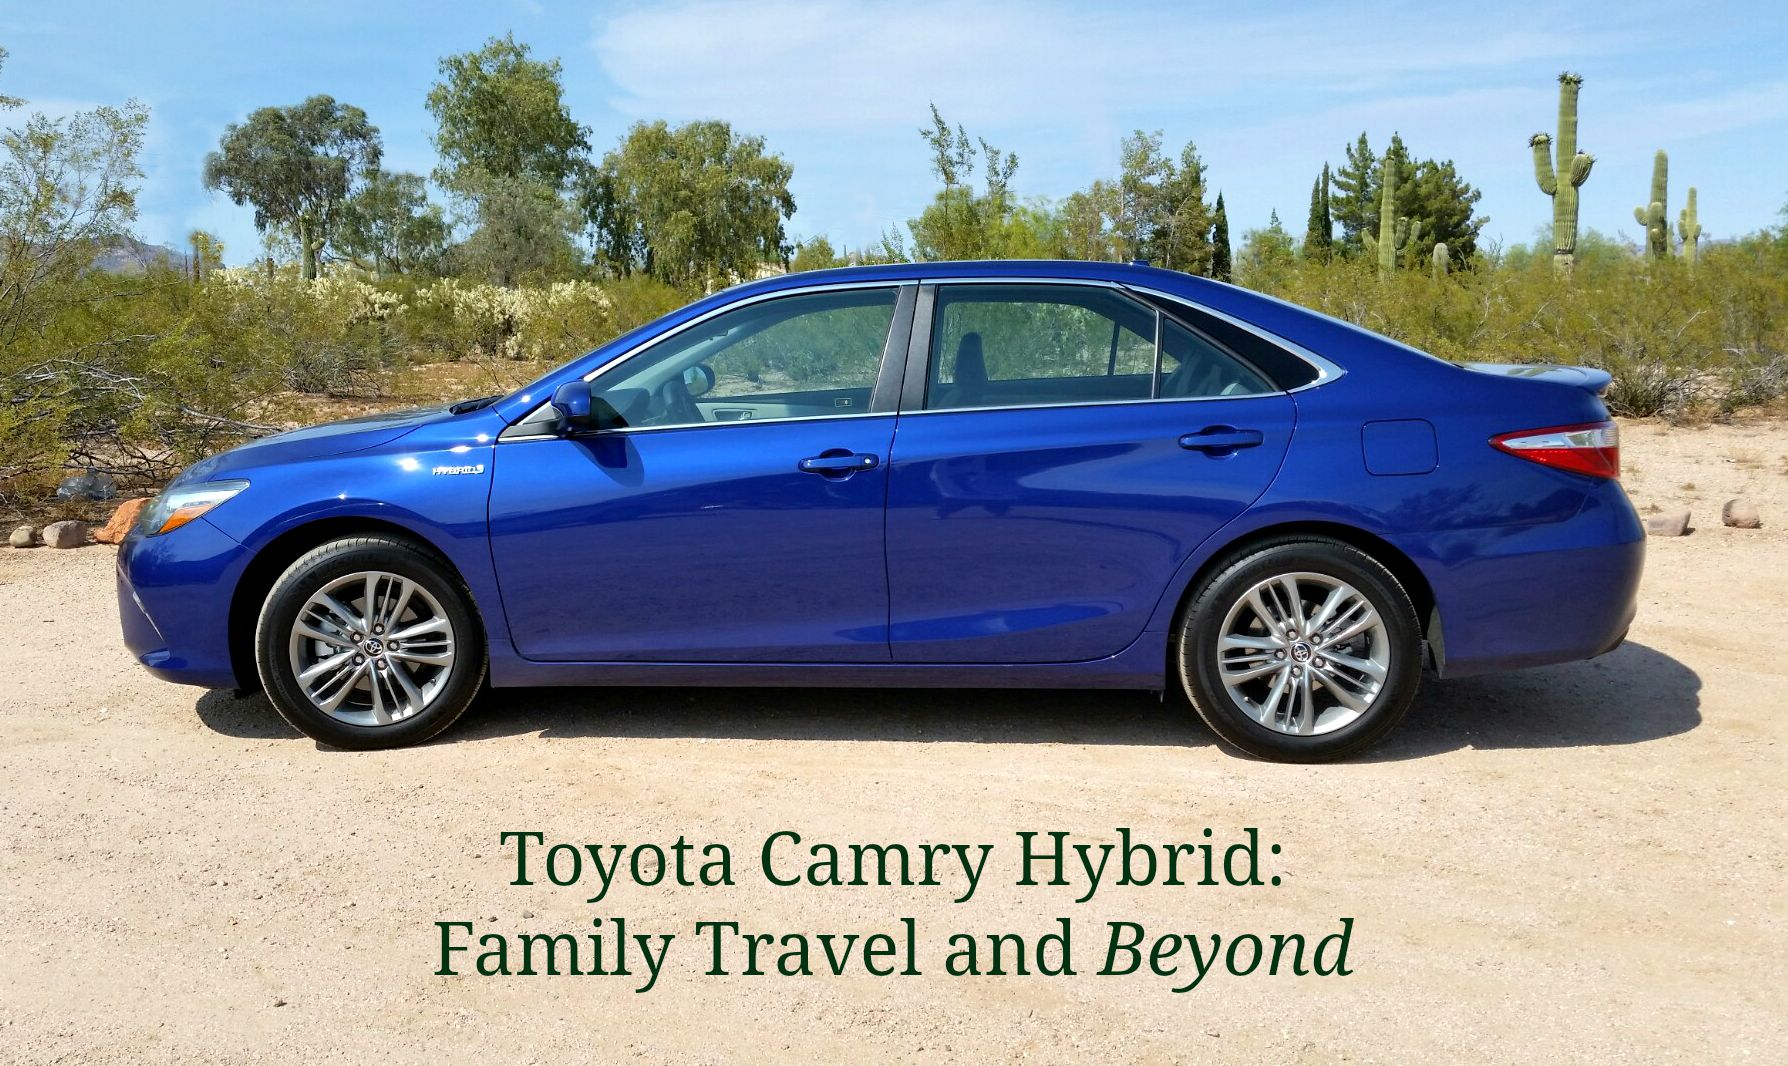 Toyota Camry Hybrid Family Travel and Beyond